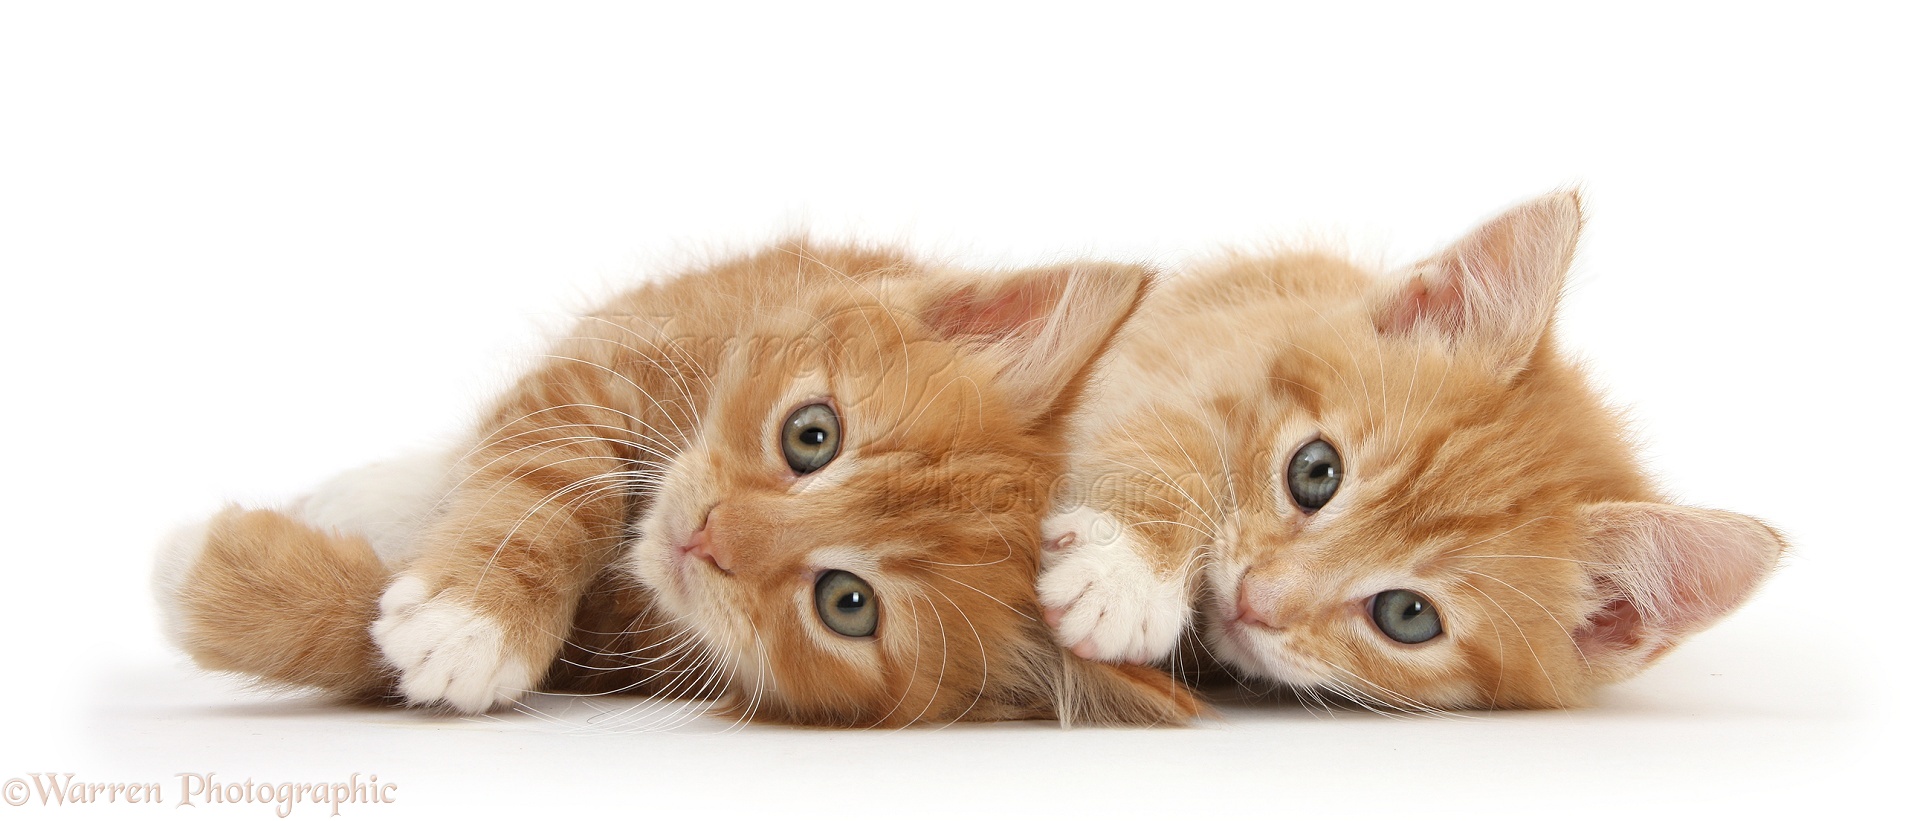 Two Ginger Kittens Lying Together On Their Sides Photo WP25767